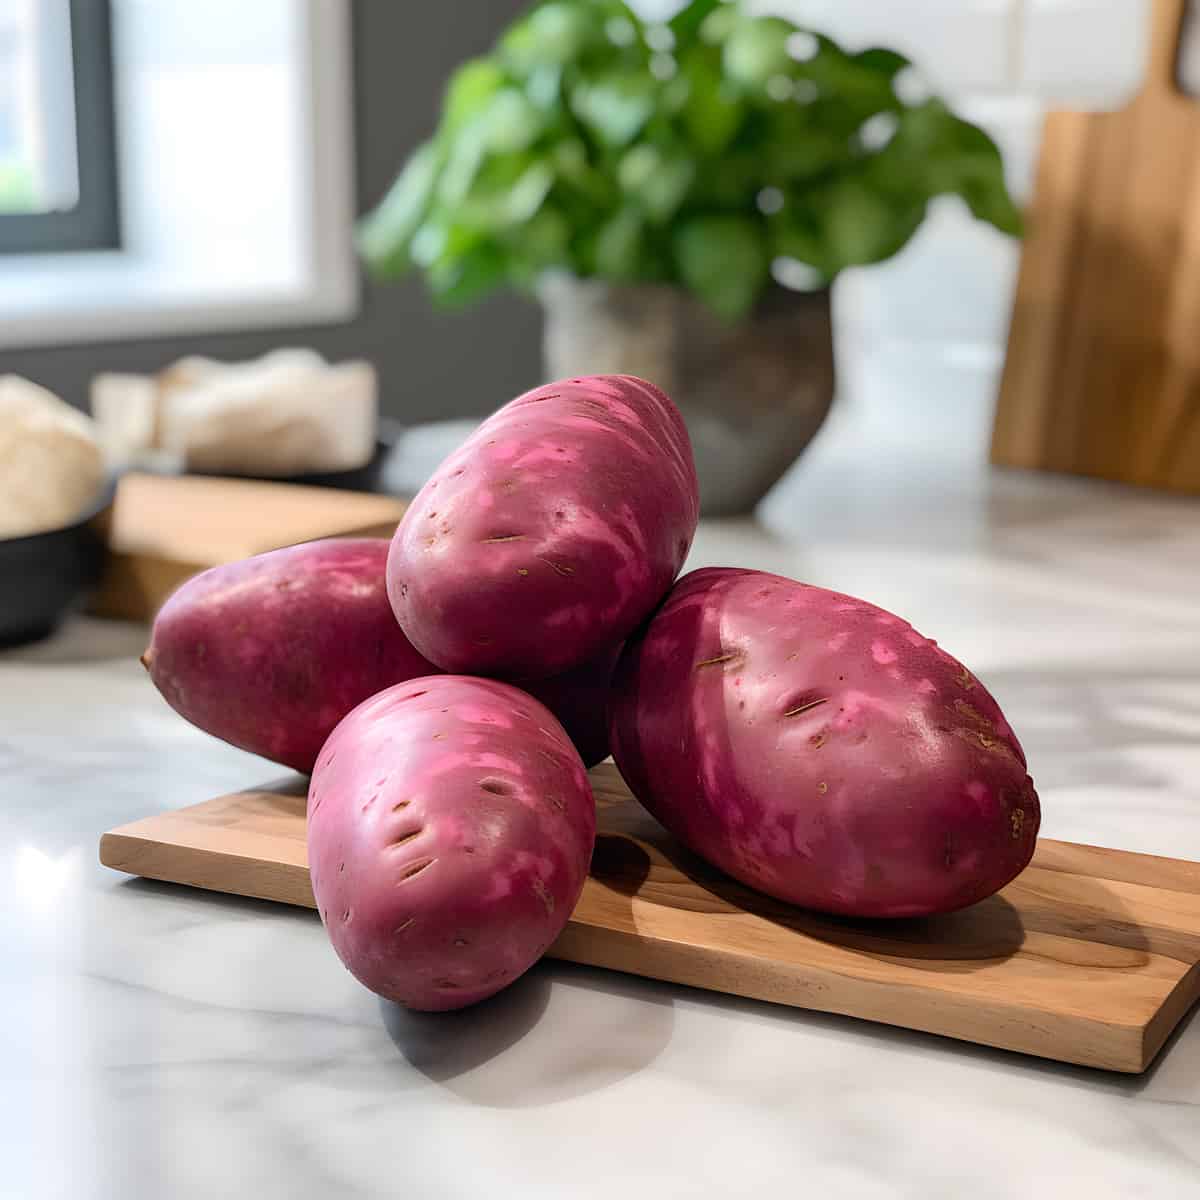 Highland Burgundy Red Potatoes on a kitchen counter